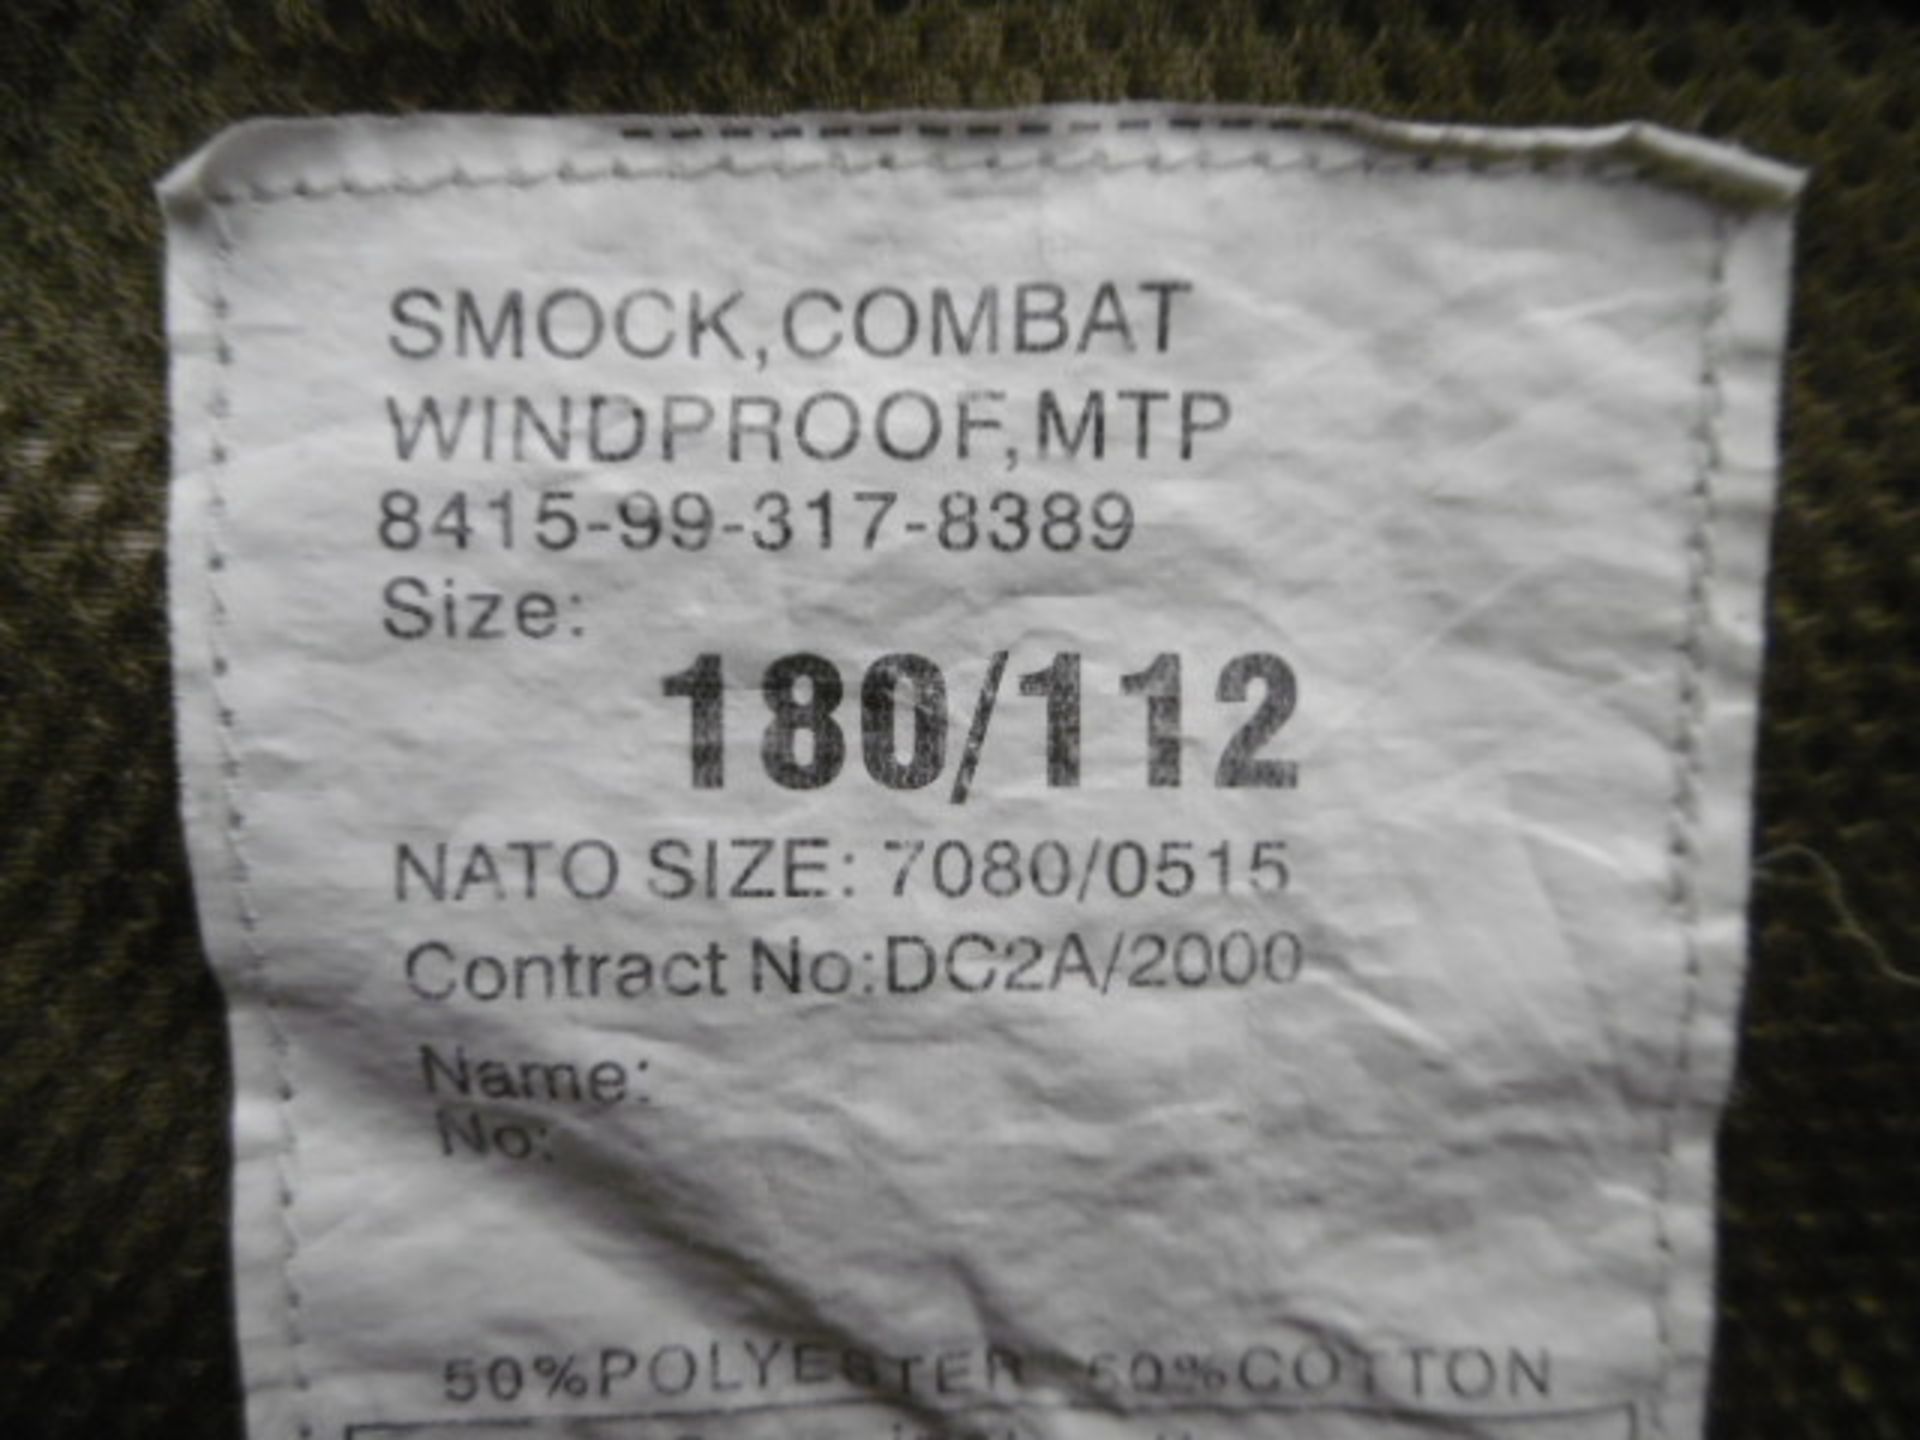 Windproof Combat Smock Size 180/112 - Image 4 of 4